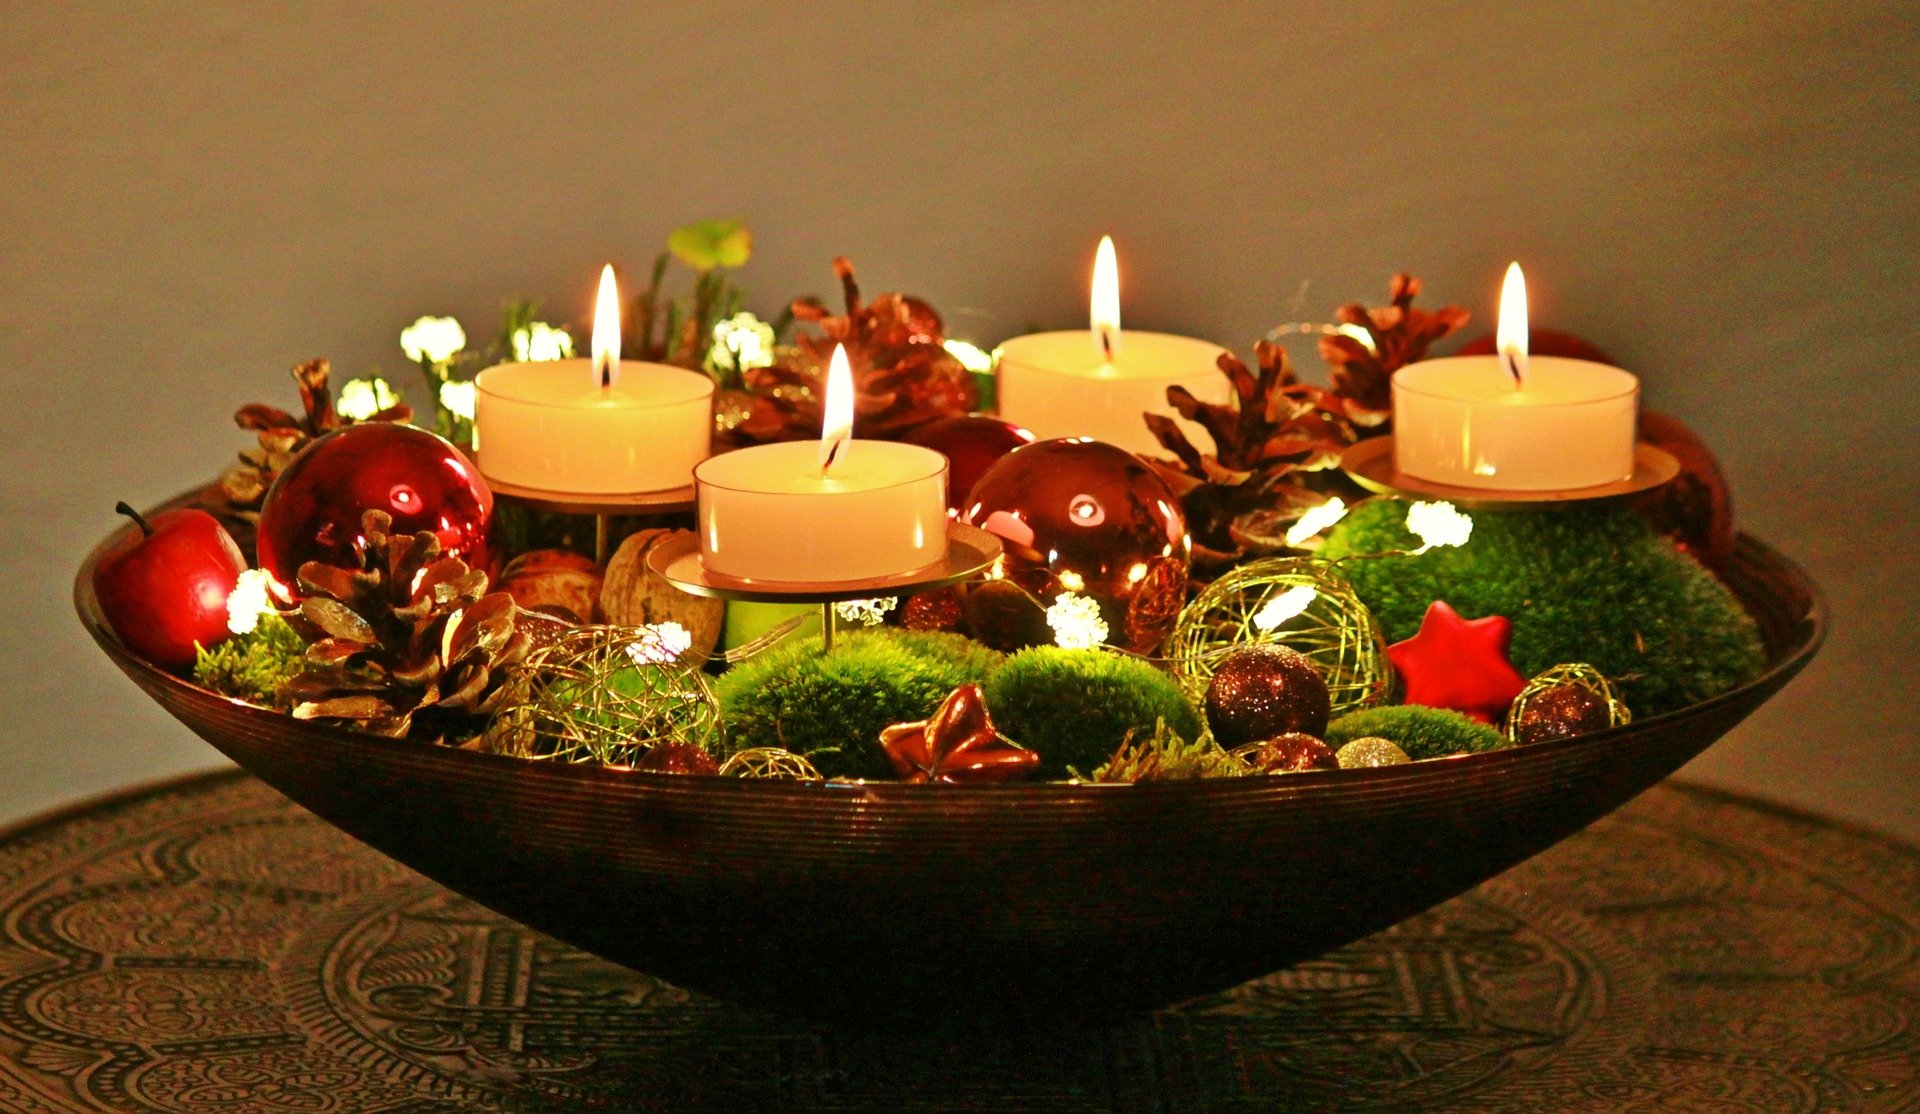 Advent candles, Image by Anja from Pixabay